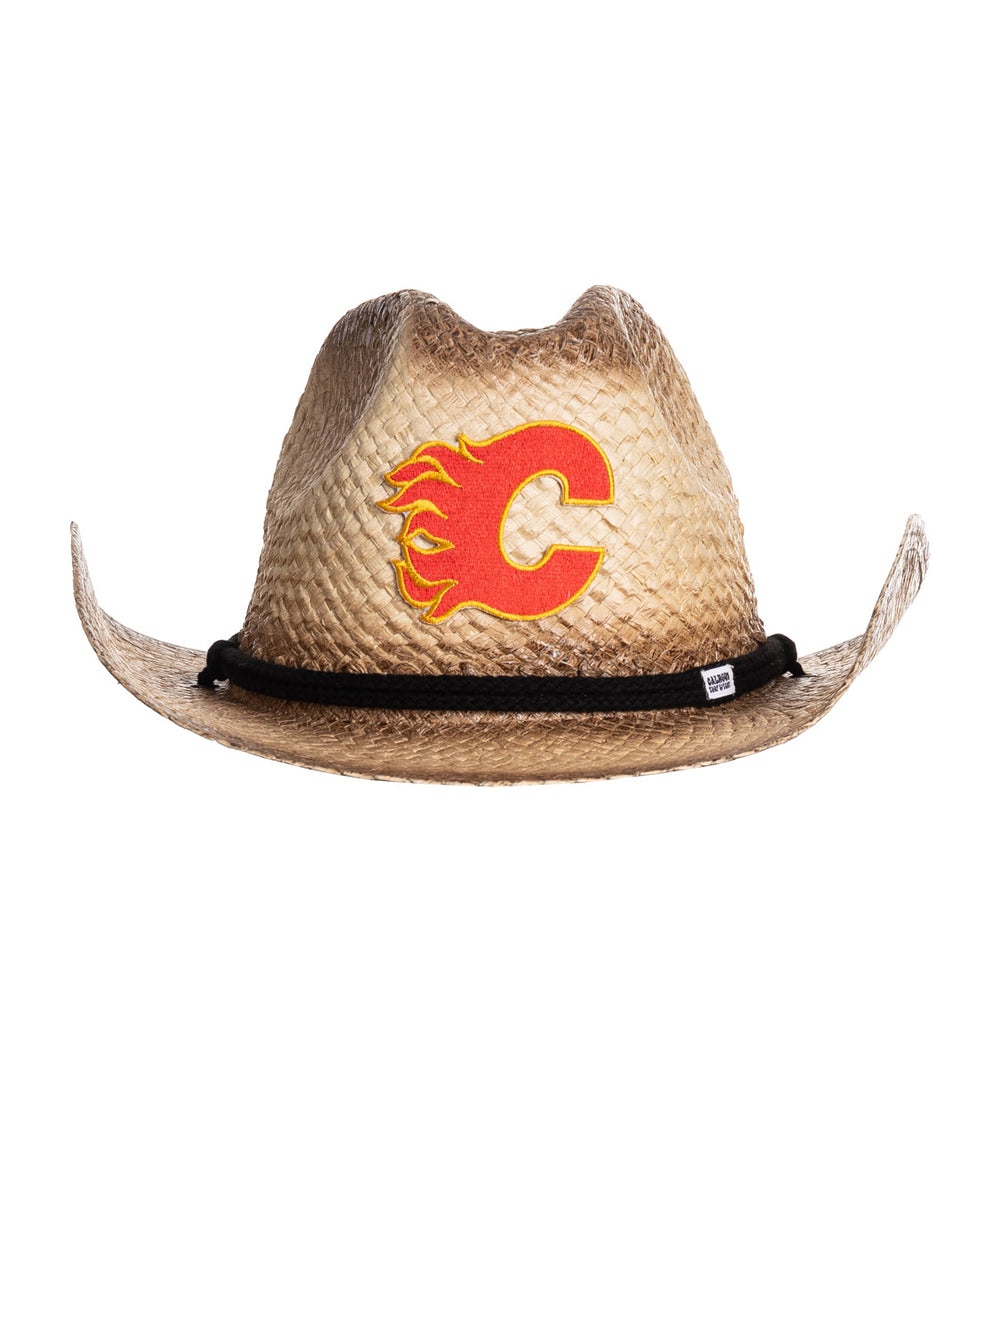 The front of the Calgary Flames straw cowboy hat. It is a tan straw hat with the Flames logo in the centre of it, with a black rope running along the crown of the hat.